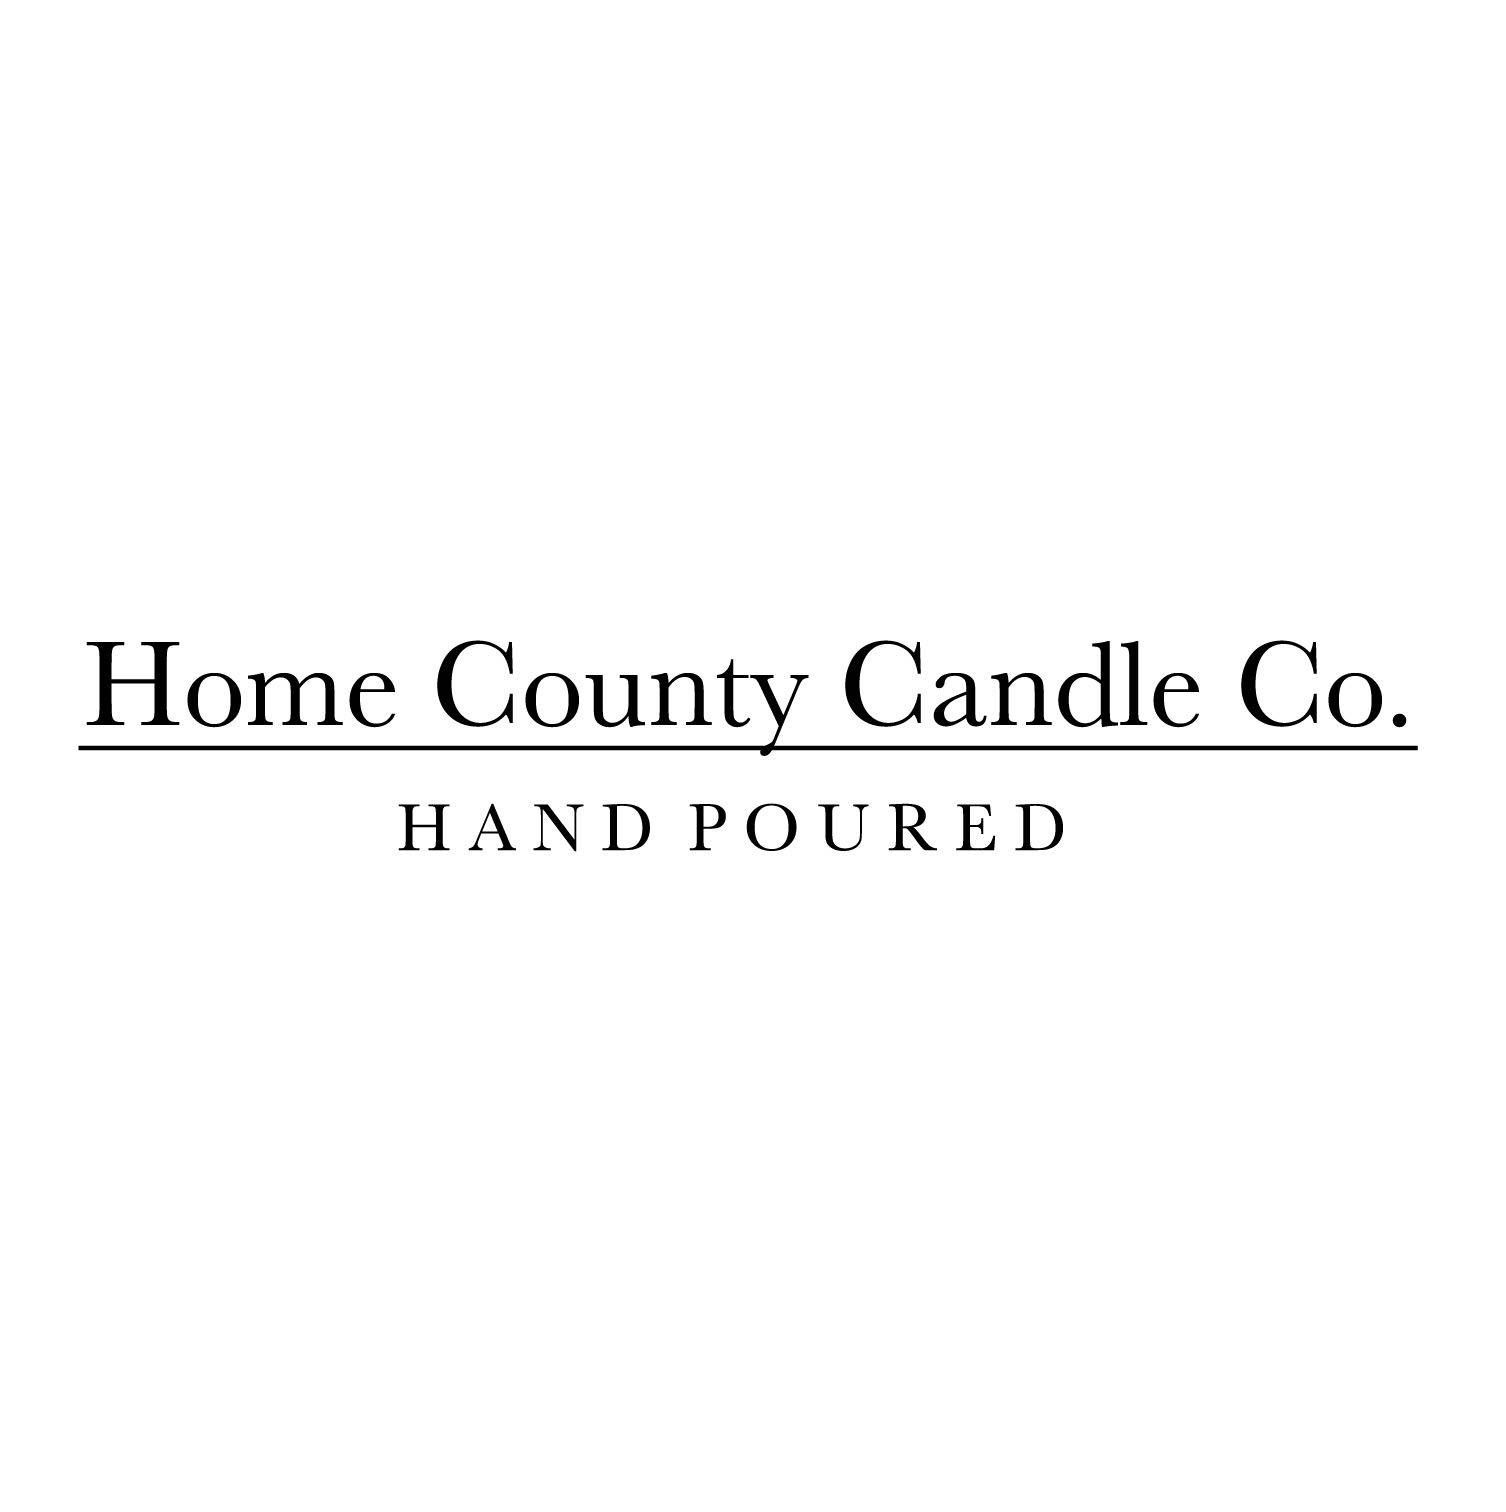 Home County Candle Co